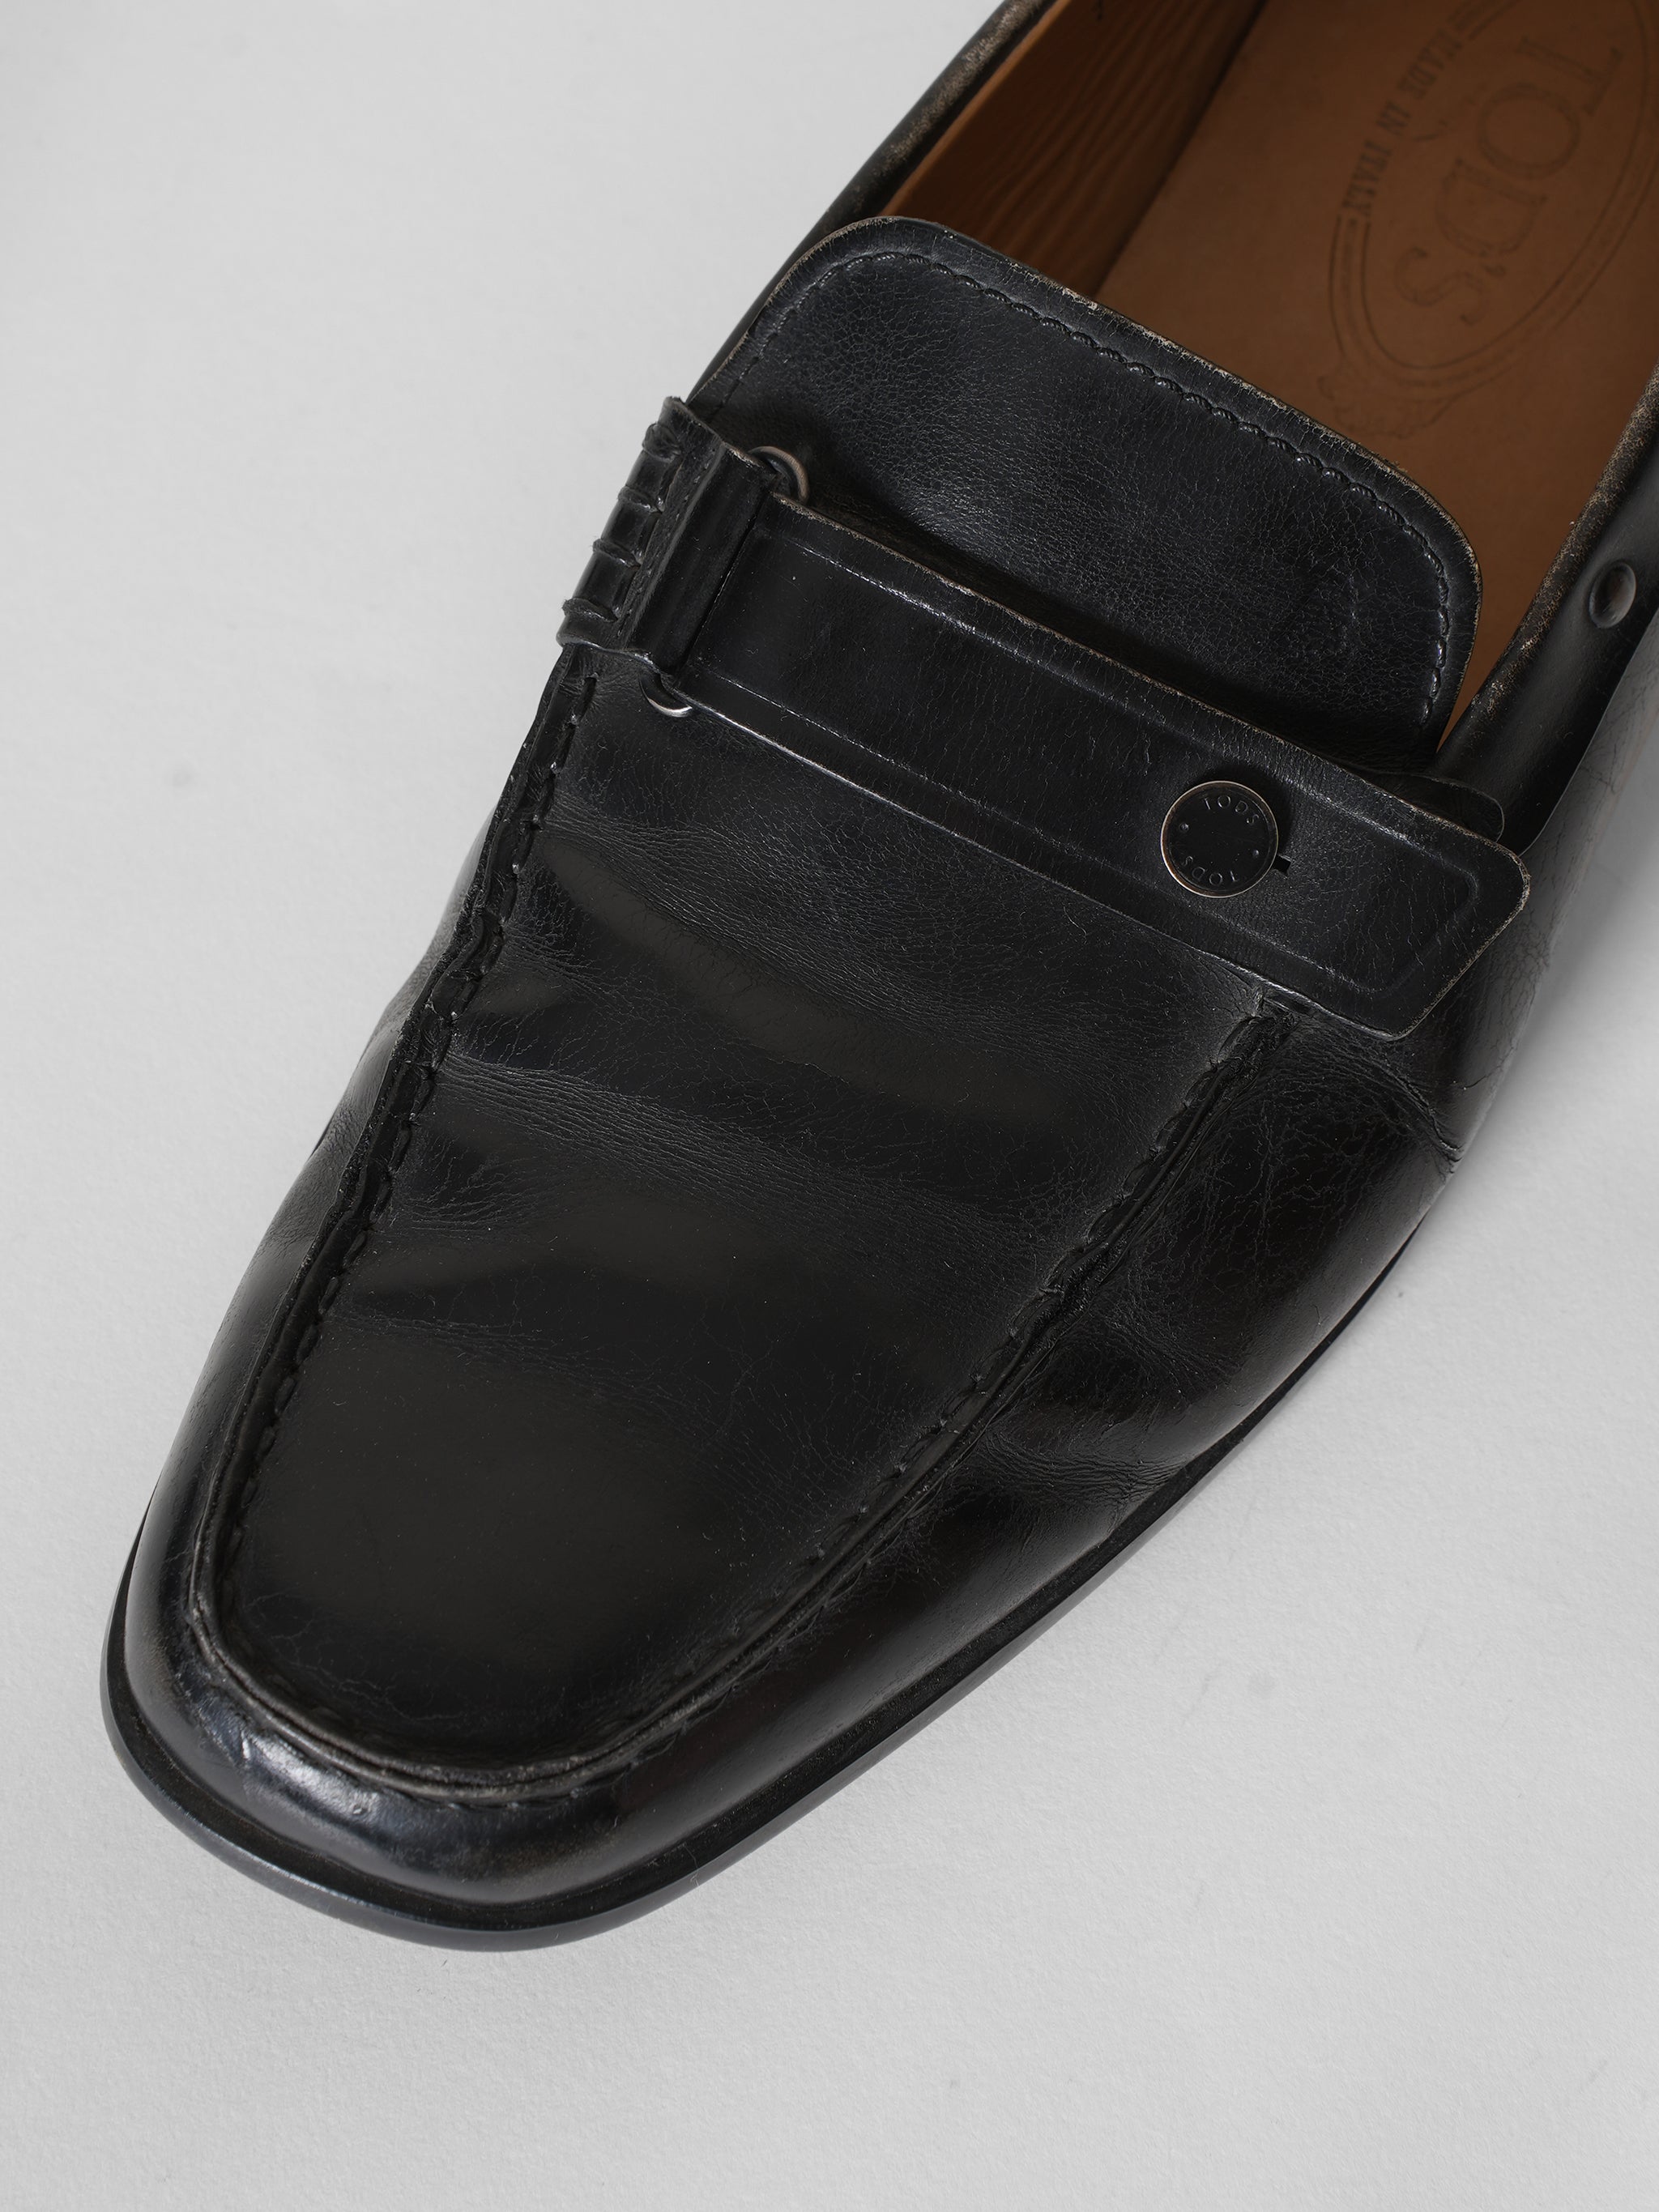 Tods Black Buckle Loafers